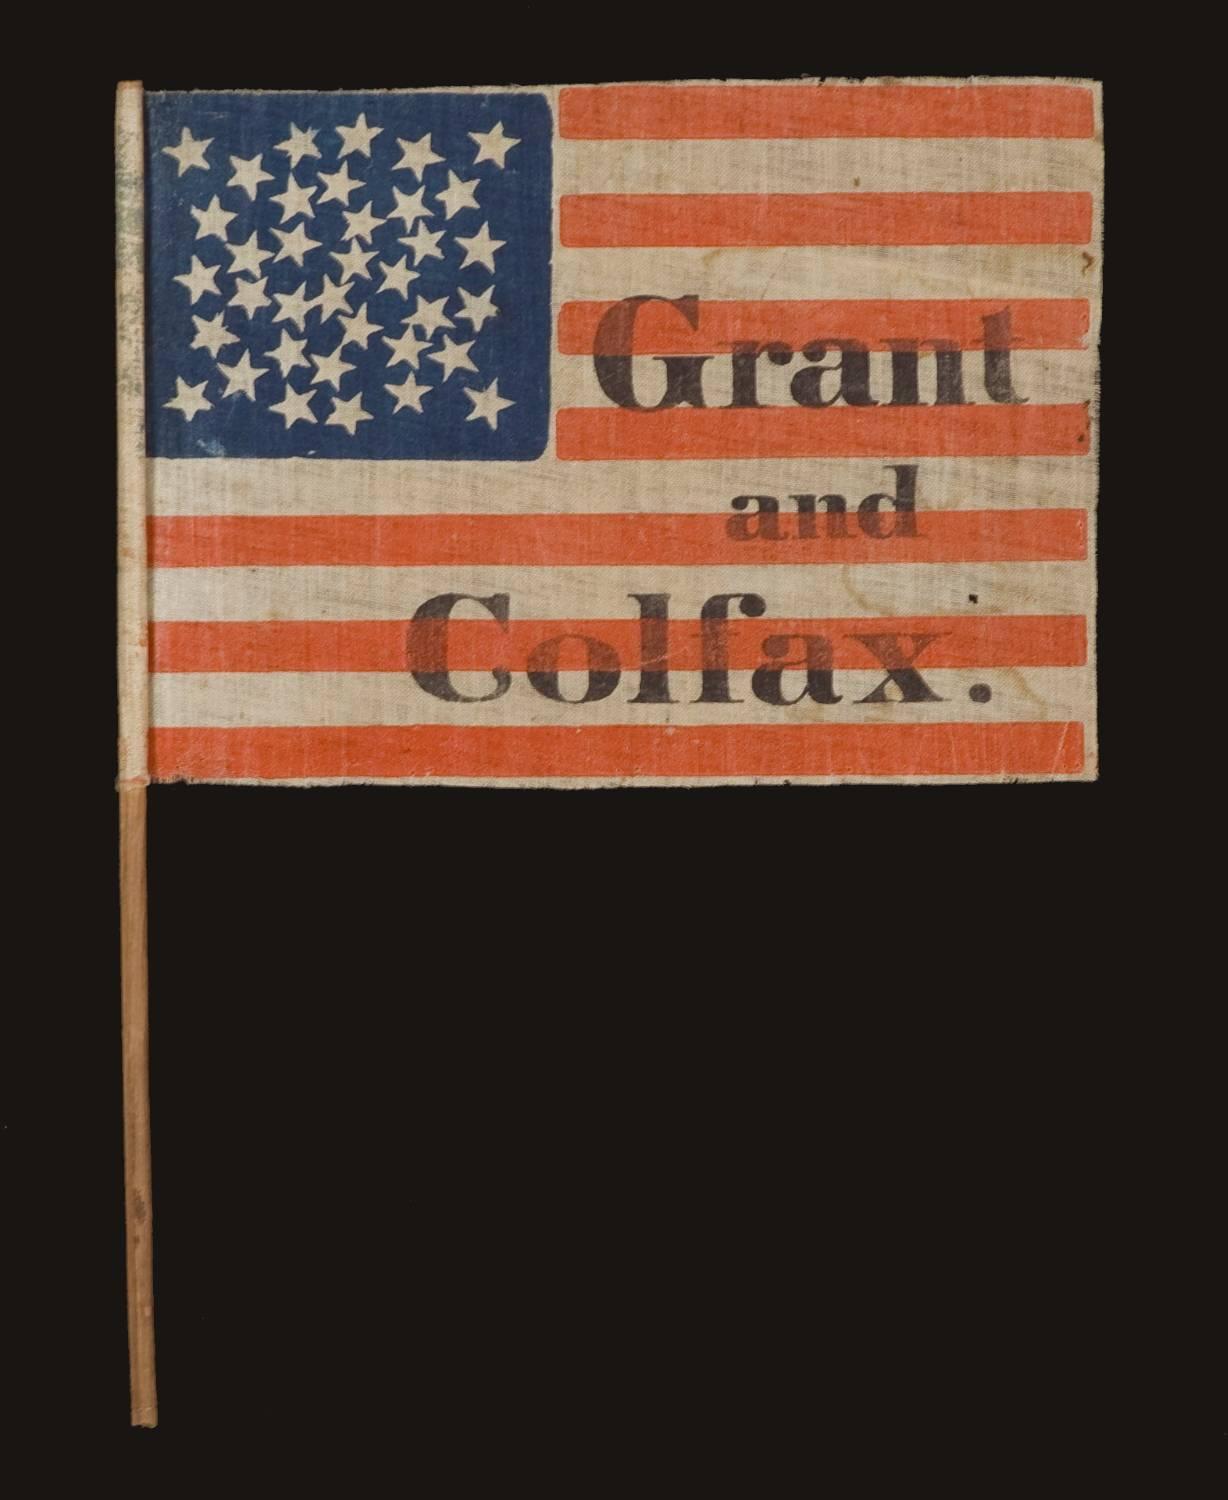 American 36 Stars in a Whimsical Configuration, 1868 Campaign of Grant & Colfa